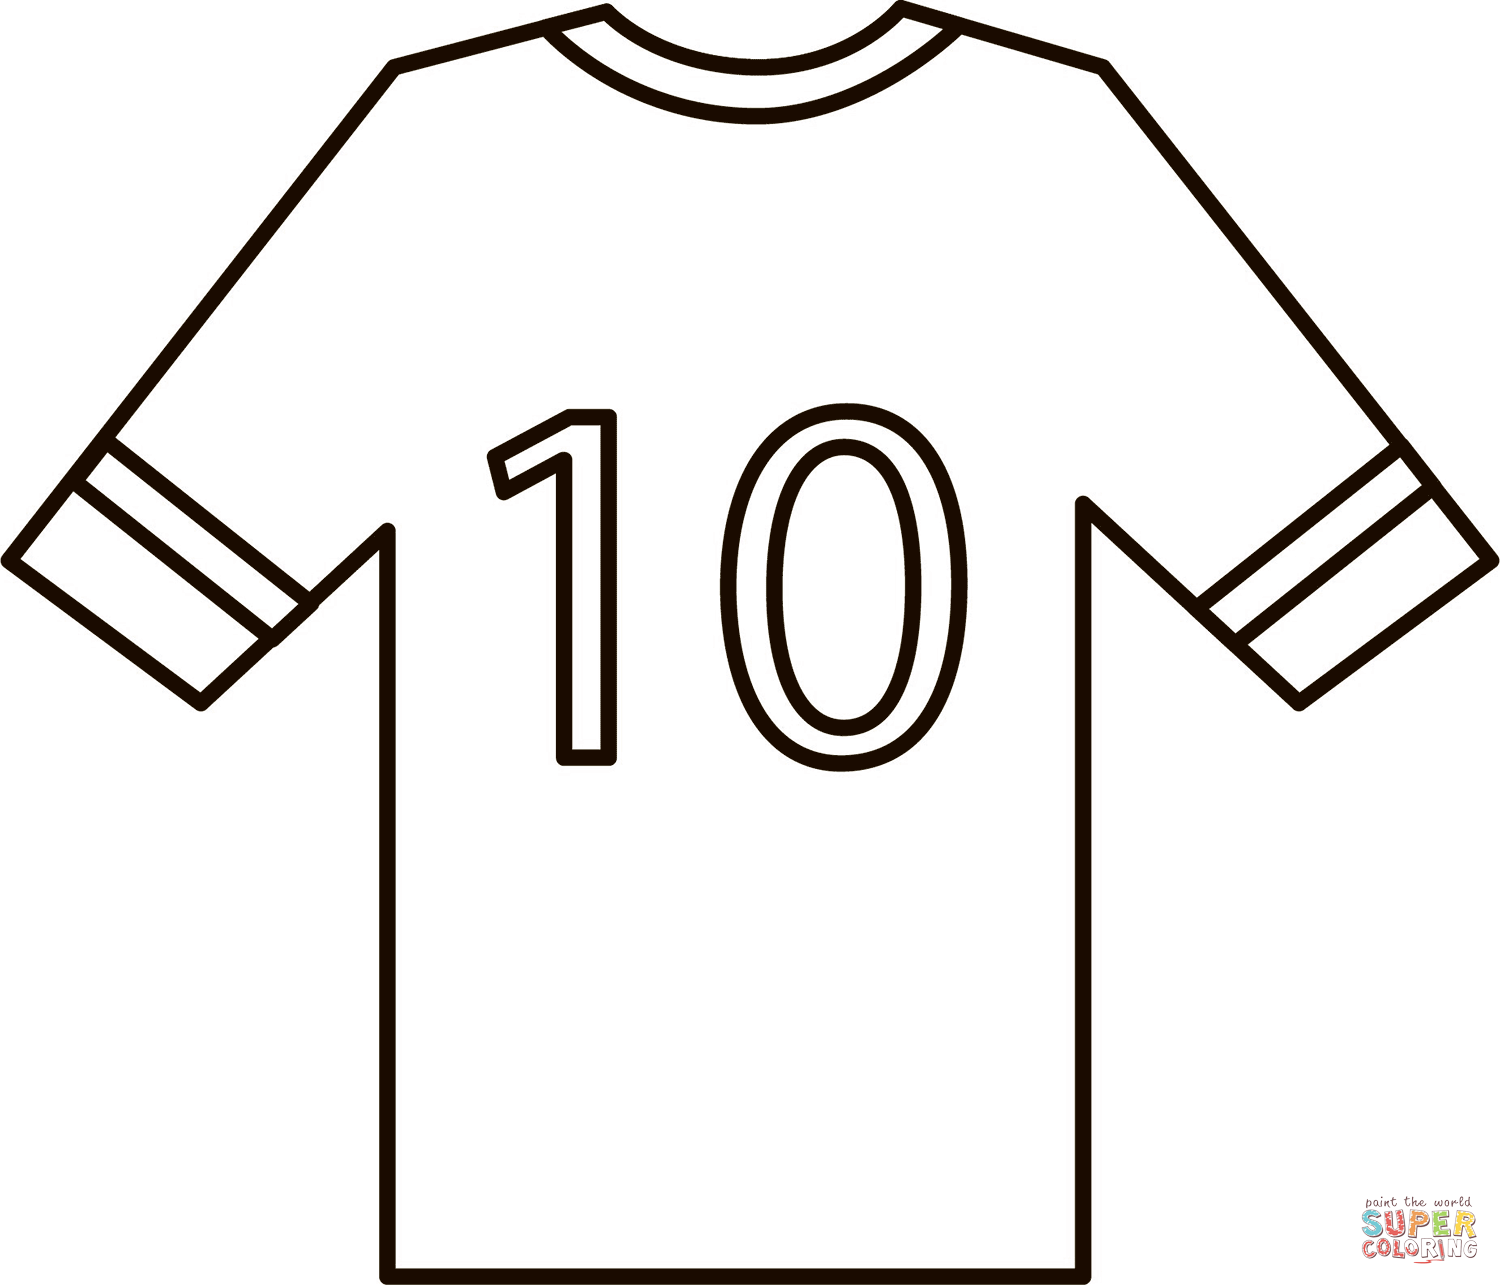 Football jersey coloring page free printable coloring pages